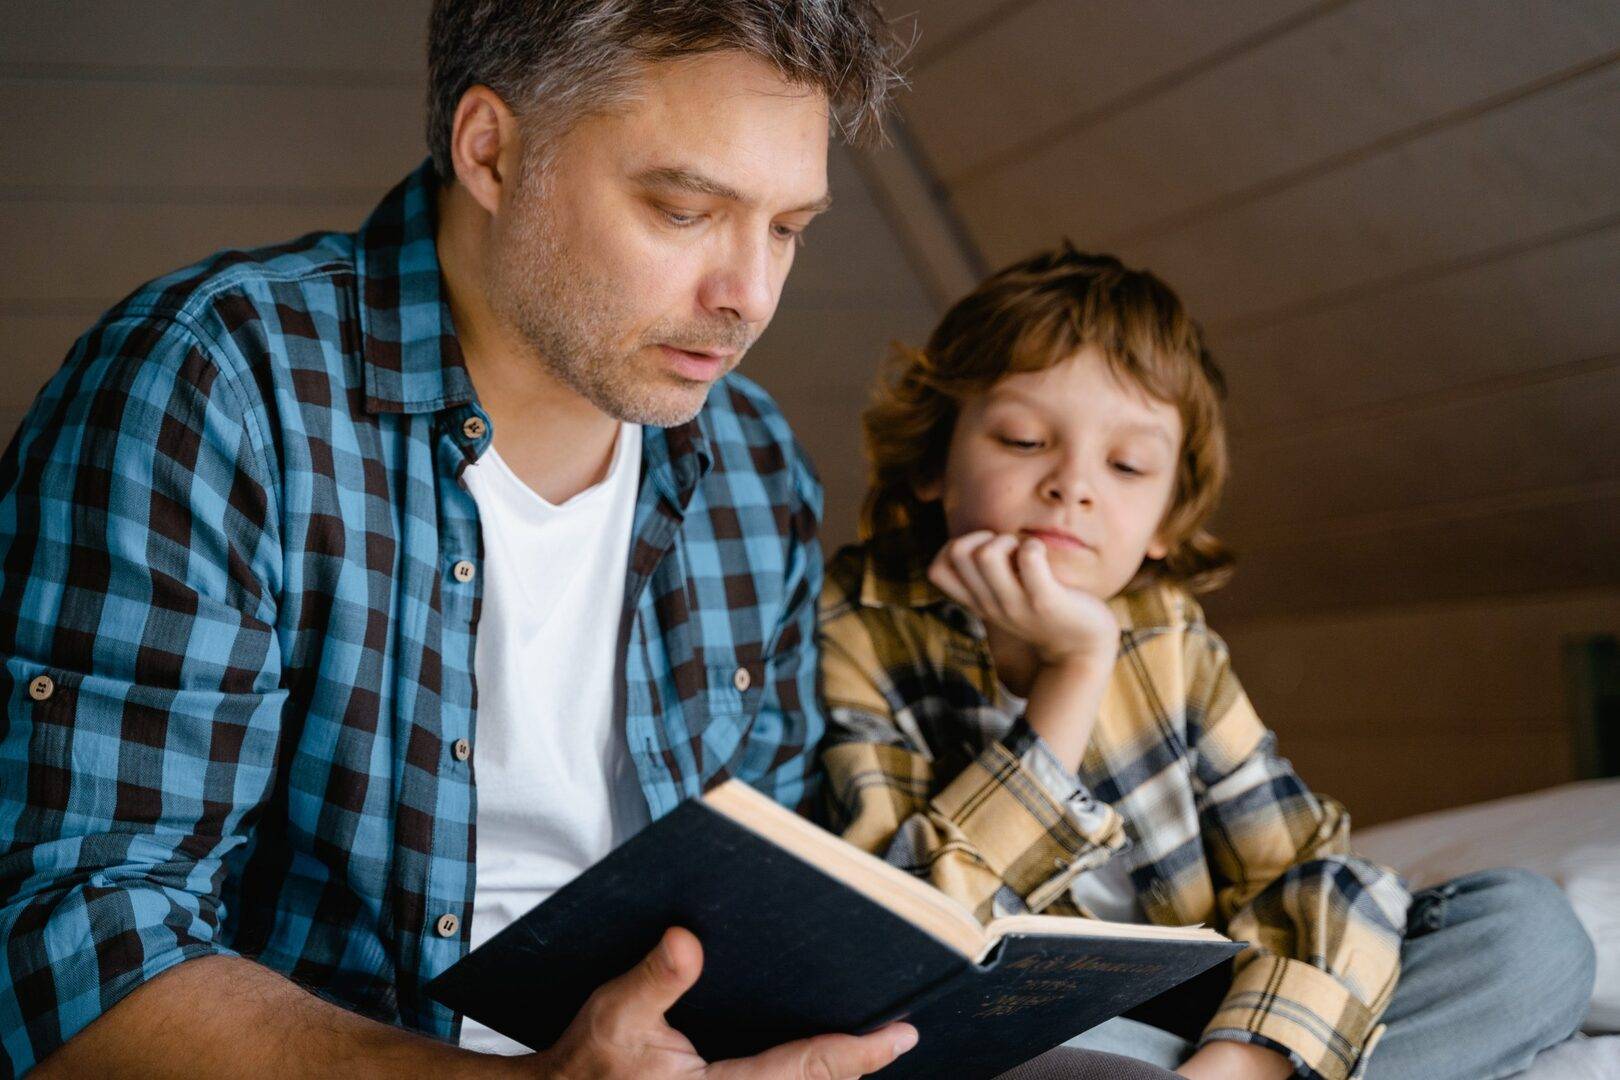 Adult and child reading